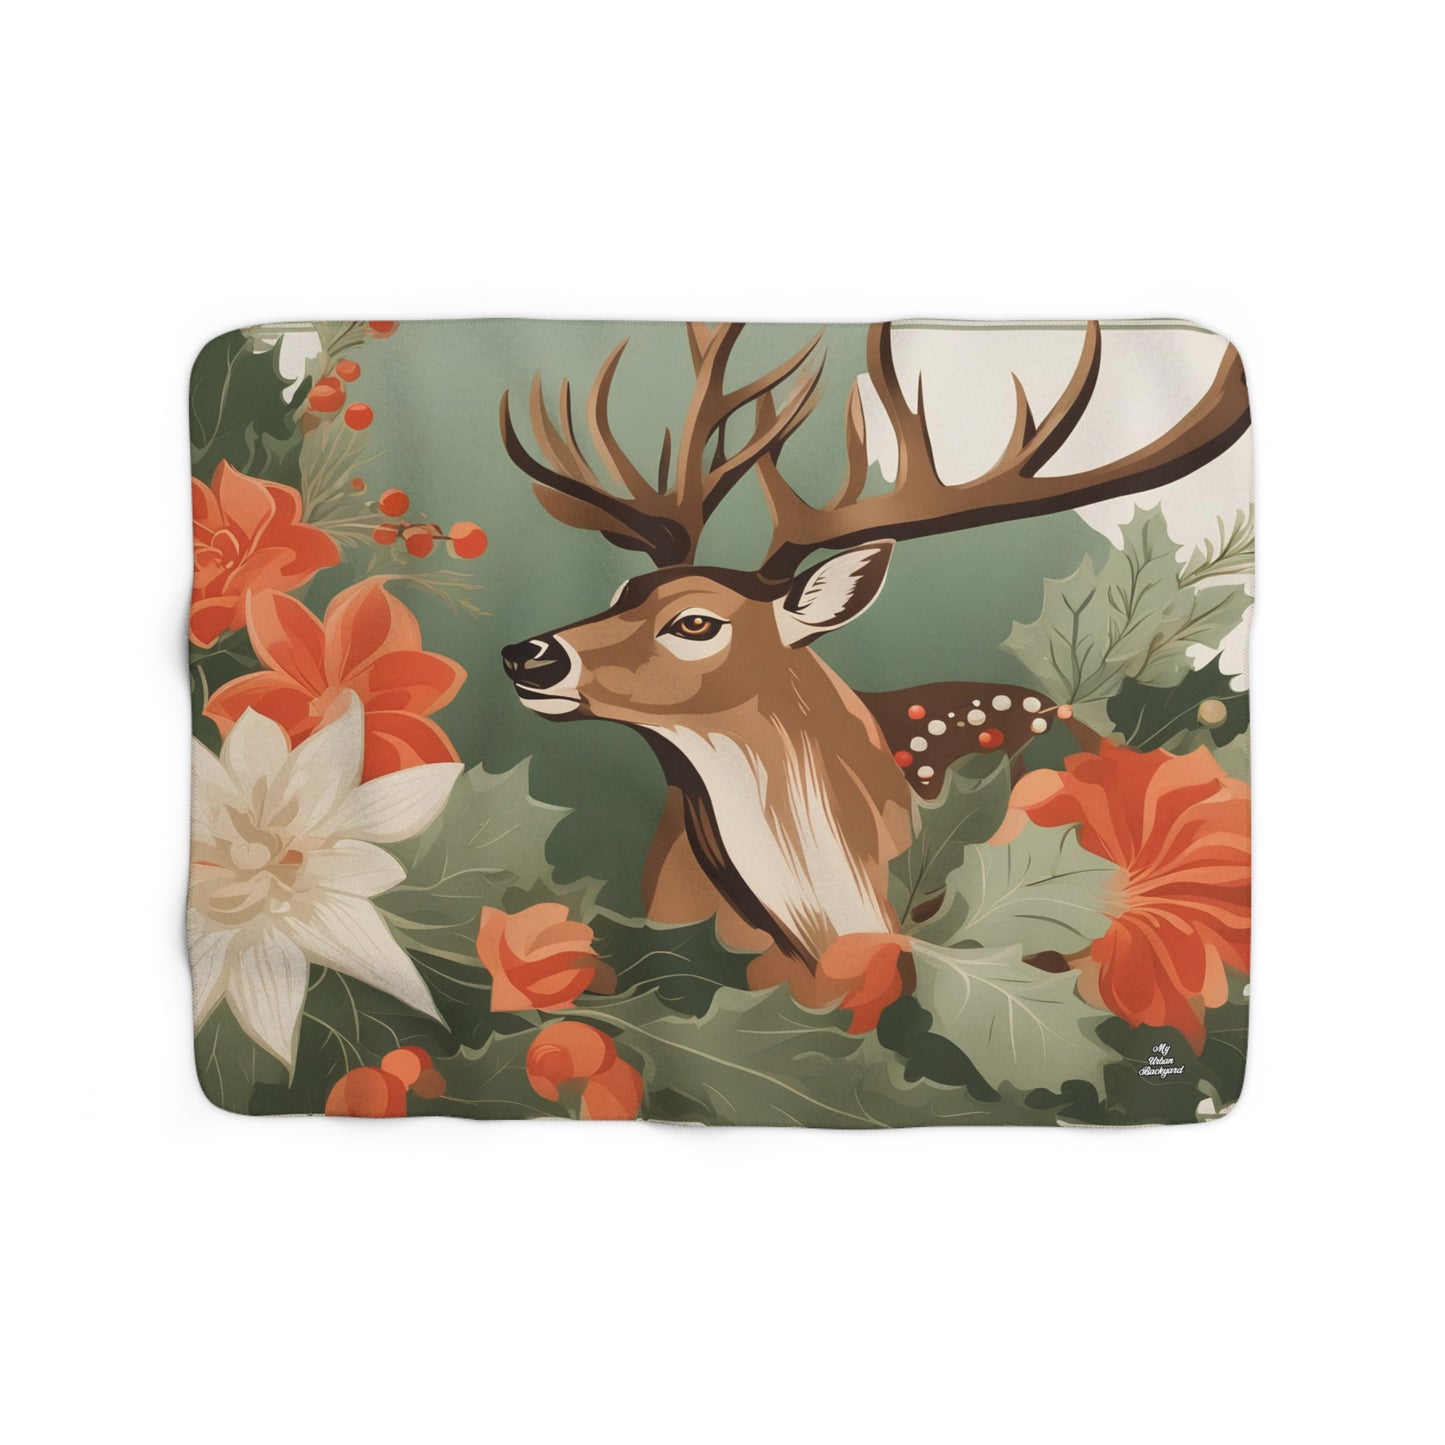 Deer with Holiday Flowers, Sherpa Fleece Blanket for Cozy Warmth, 50"x60"